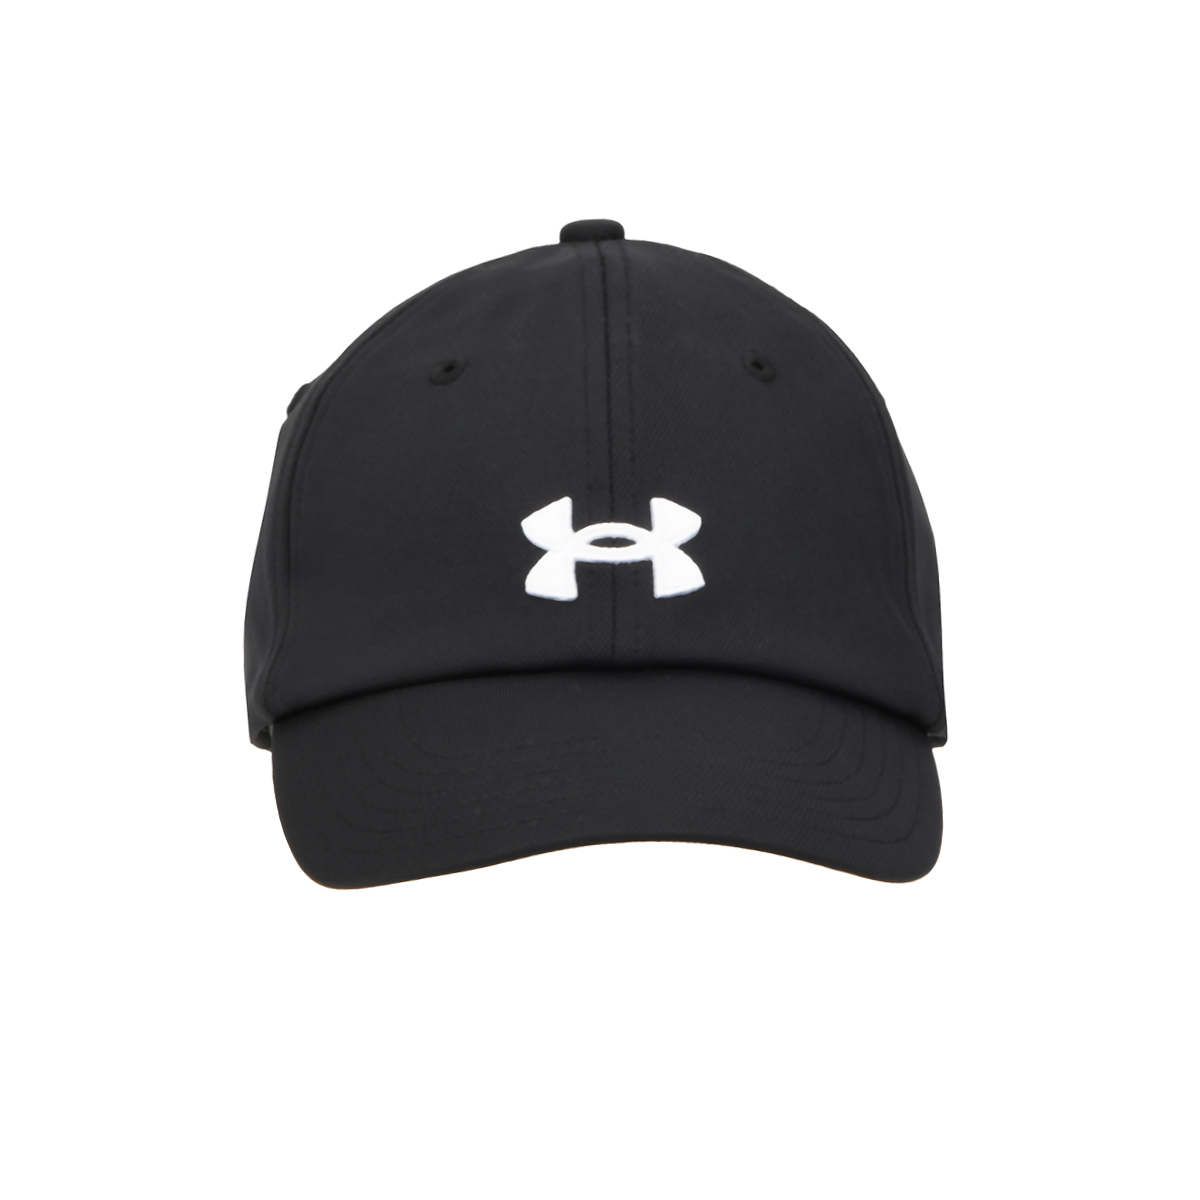 Gorra Under Armour Blitzing,  image number null